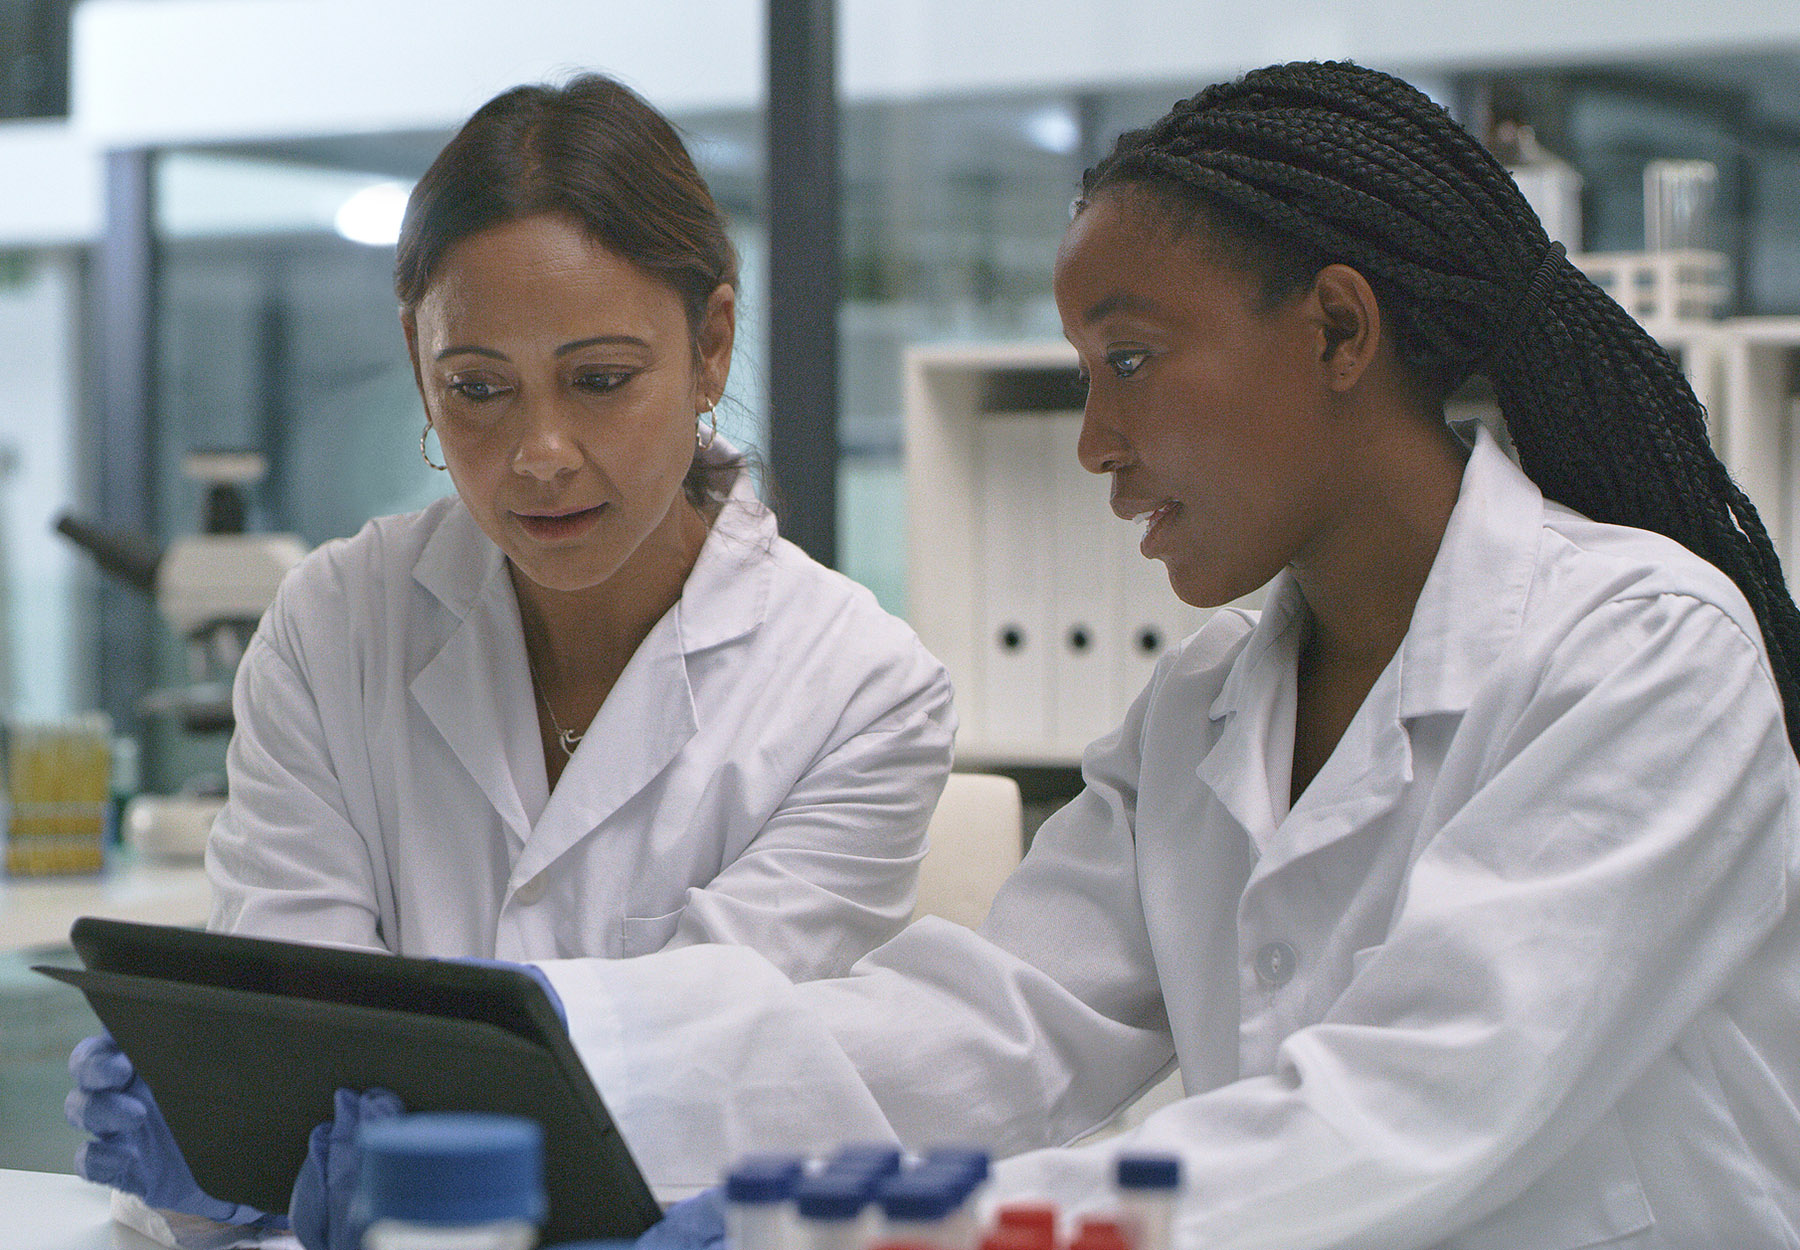 Stock image of two female scientists using a computer in the lab